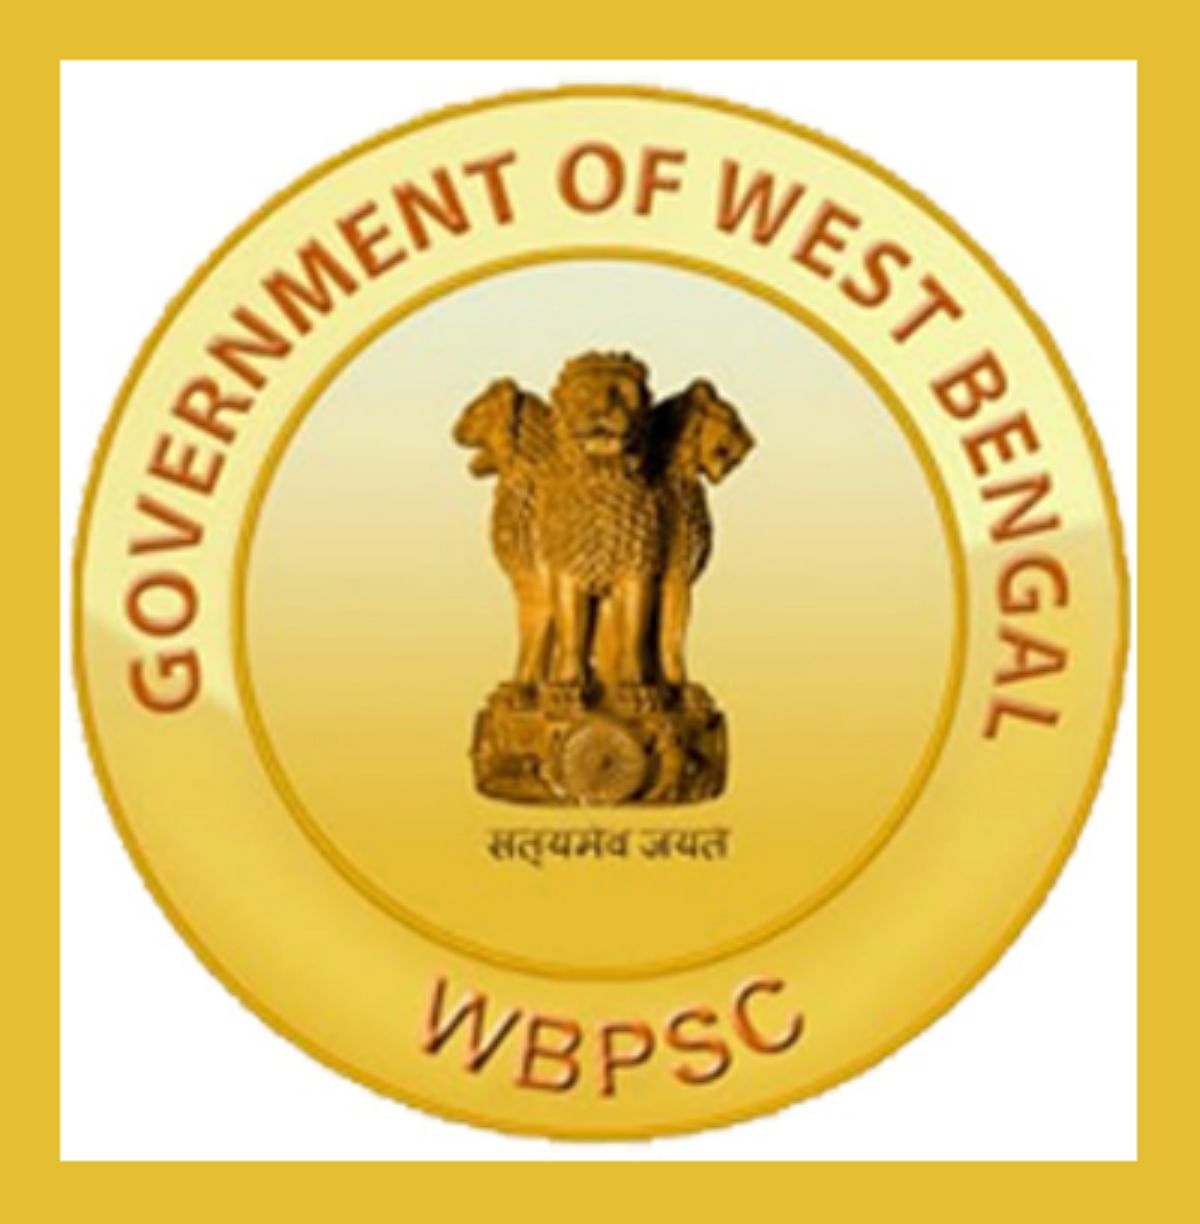 WBPSC Civil Services Main 2019 Result Declared, Direct Link to View Scorecard Here